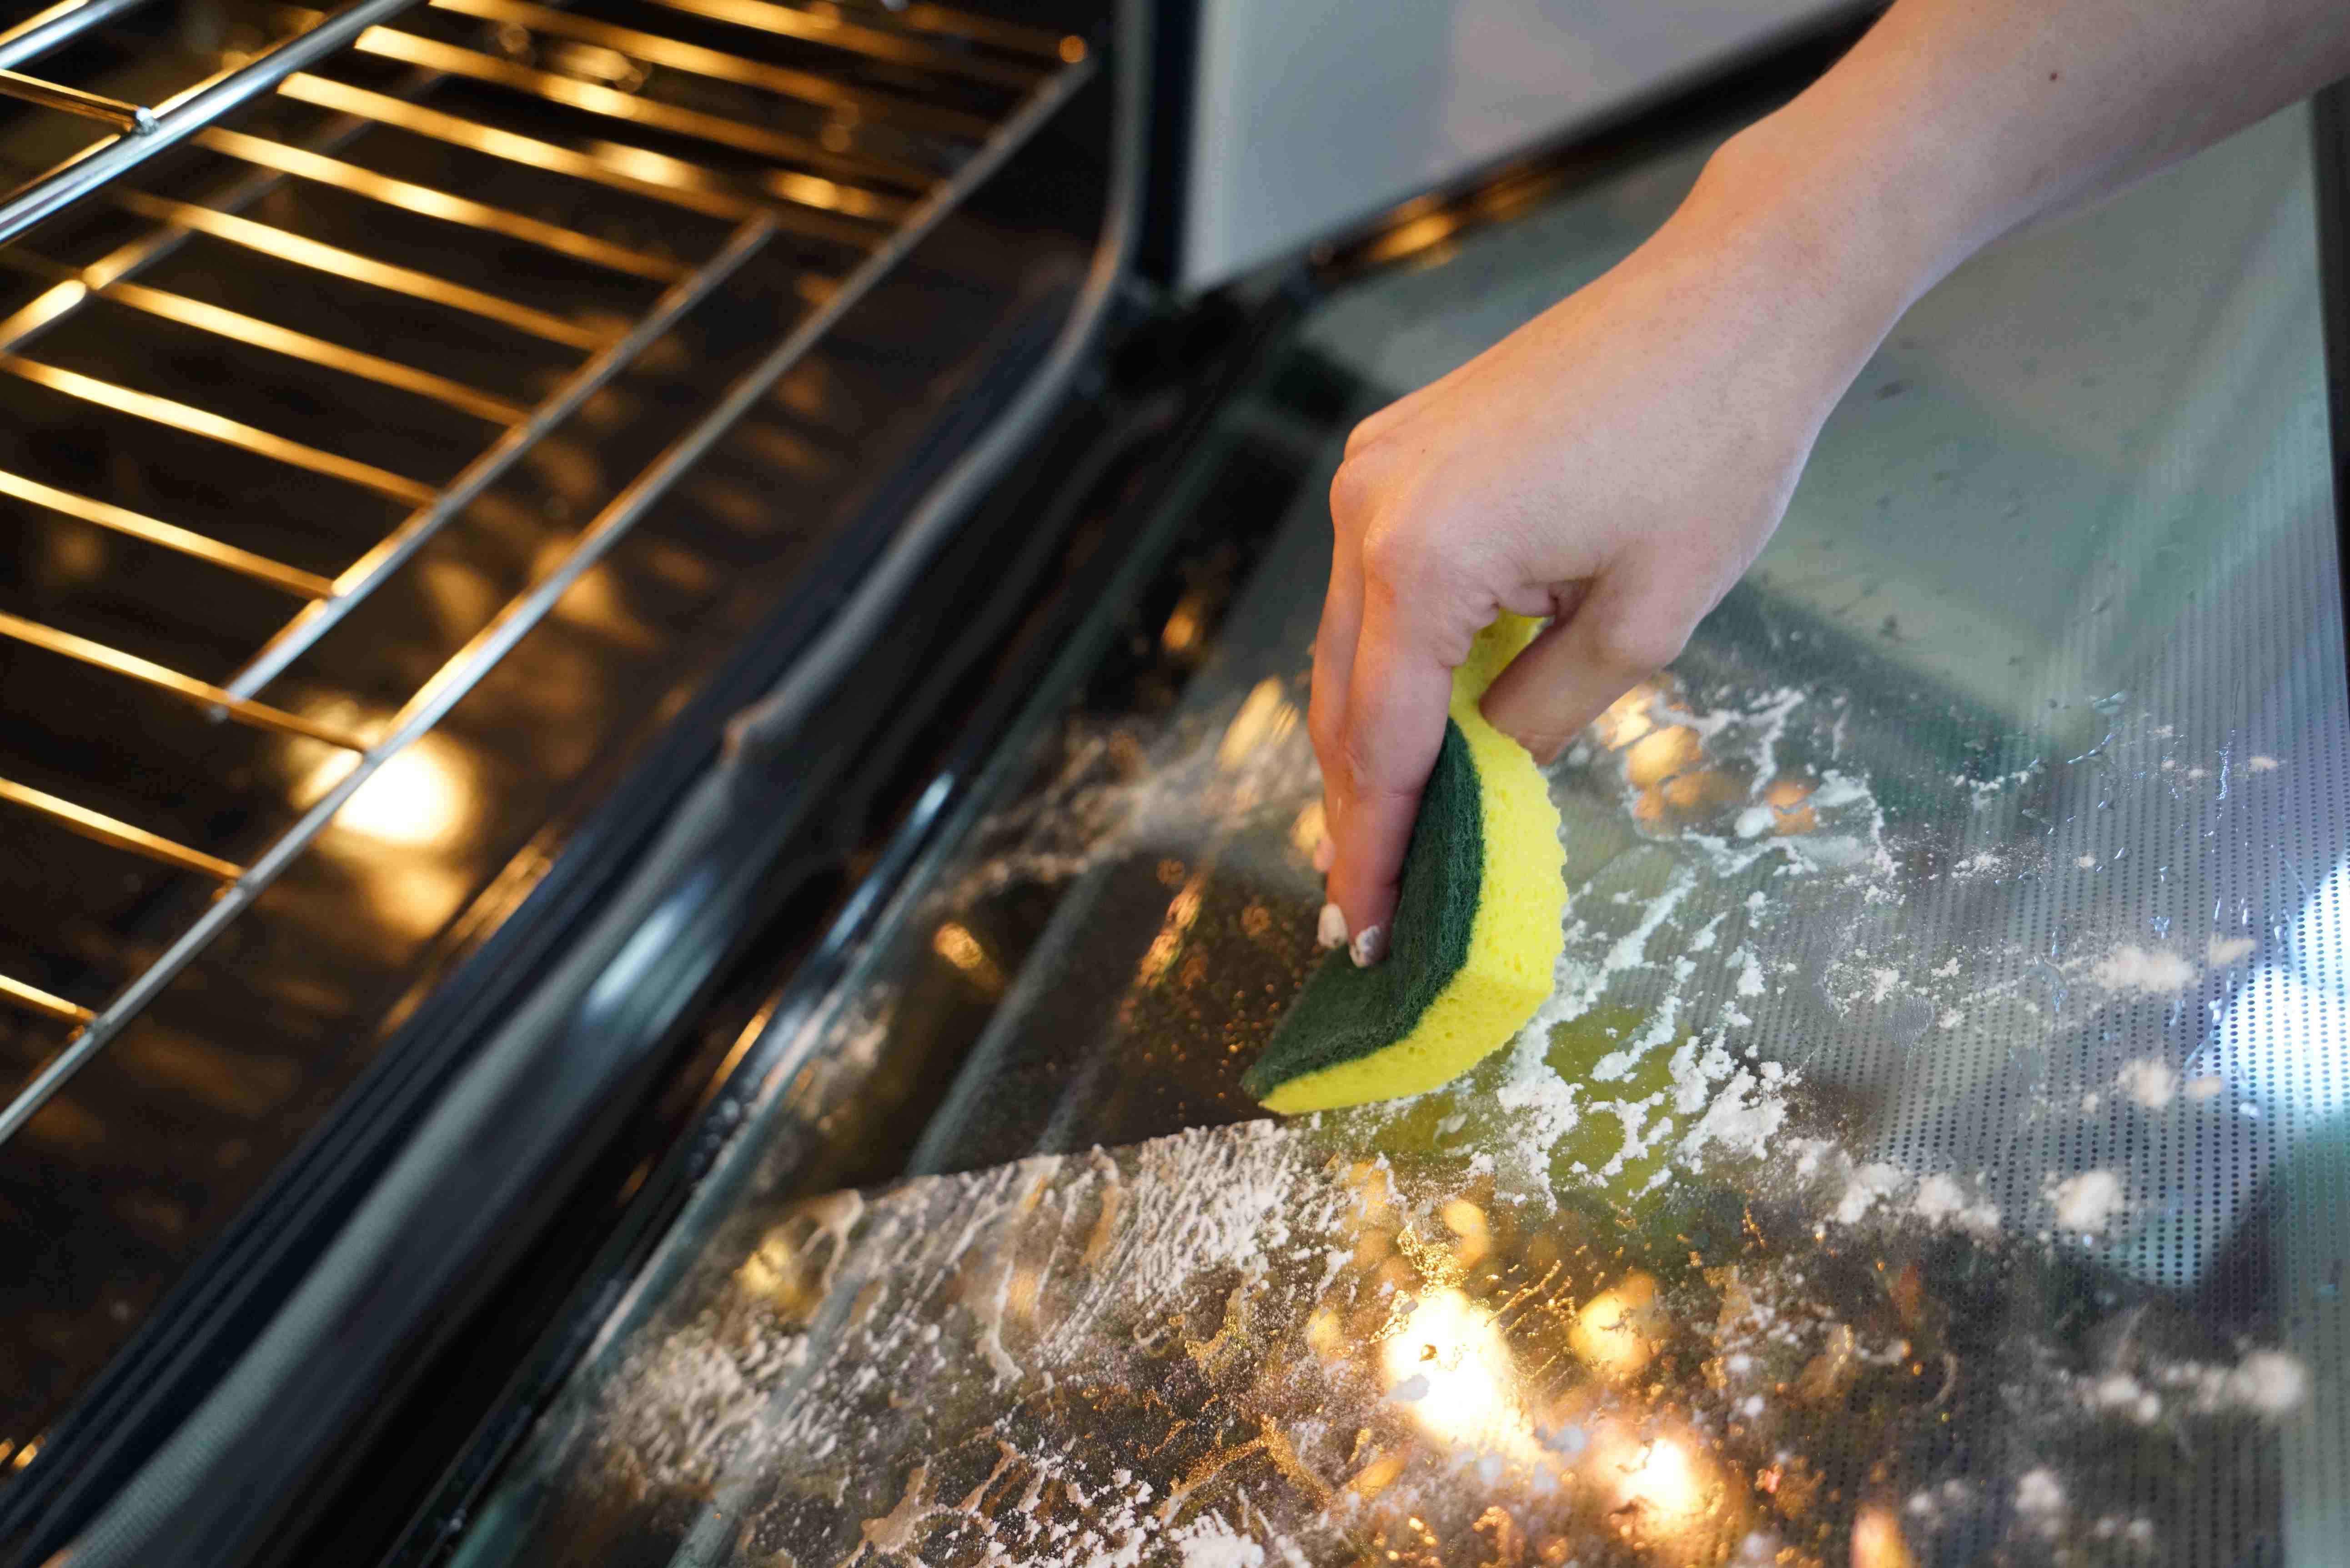 How to Clean Oven Racks With Baking Soda 